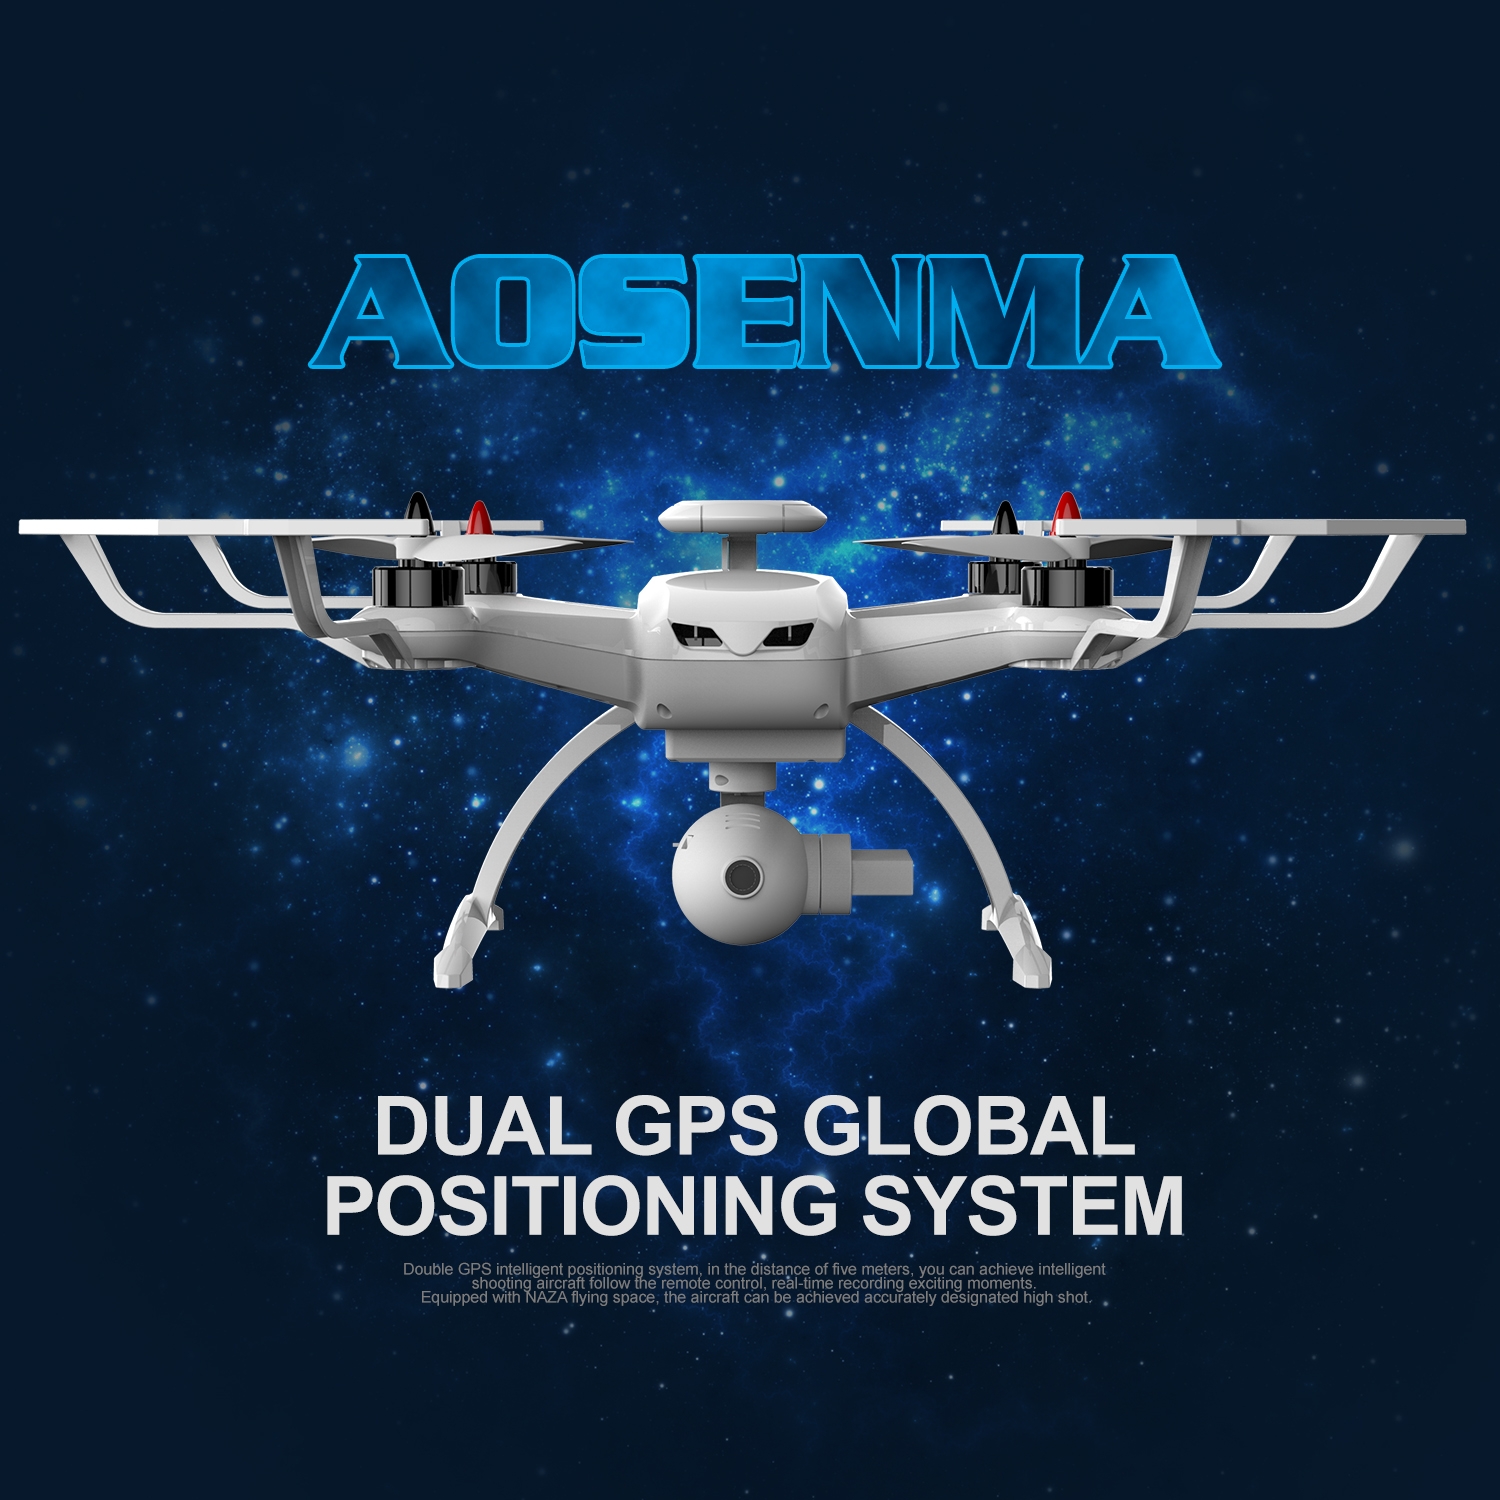 AOSENMA CG035 Brushless Double GPS 5.8G FPV With 1080P HD Gimbal Camera Follow Me Mode RC Quadcopter